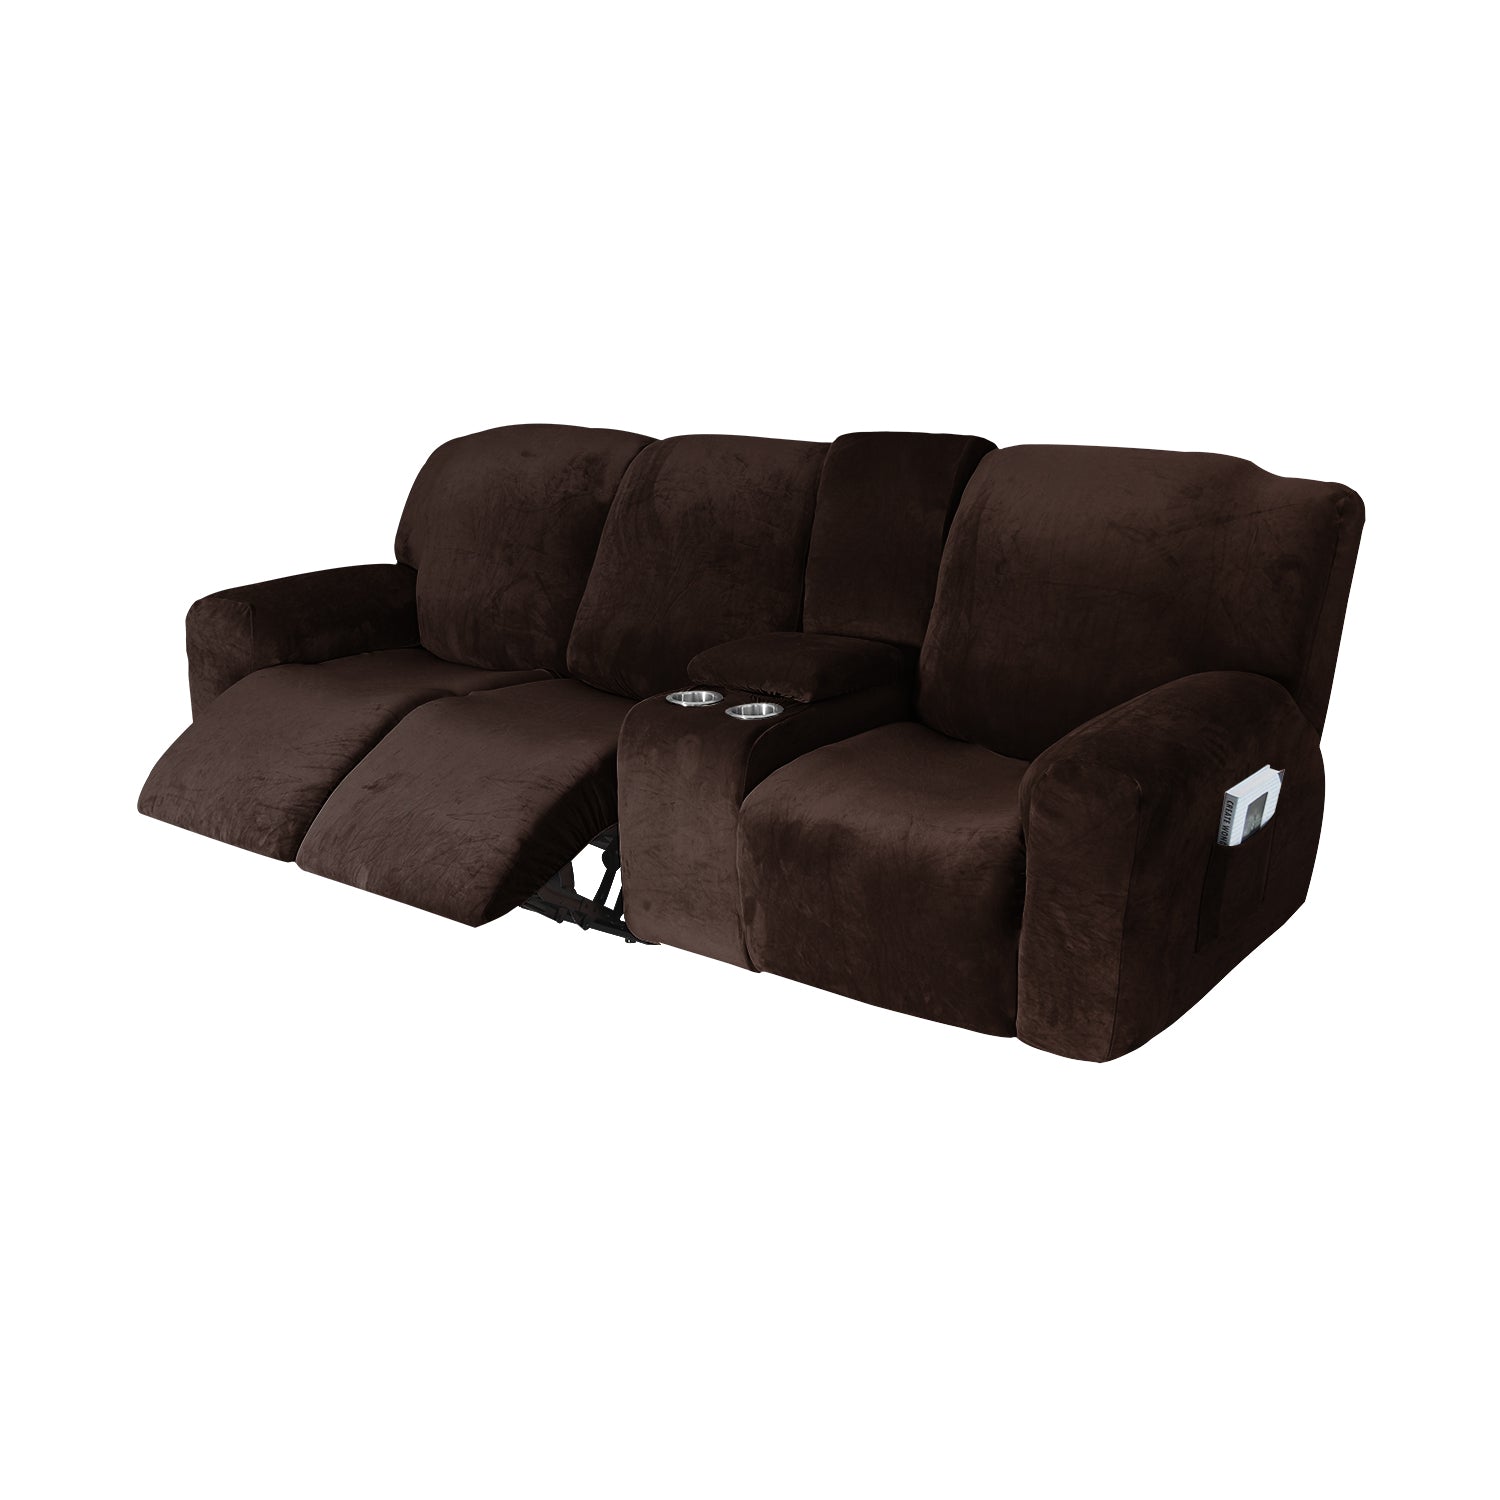 3 Seats-Recliner Cover-with Cup Holders-Velvet-Brown